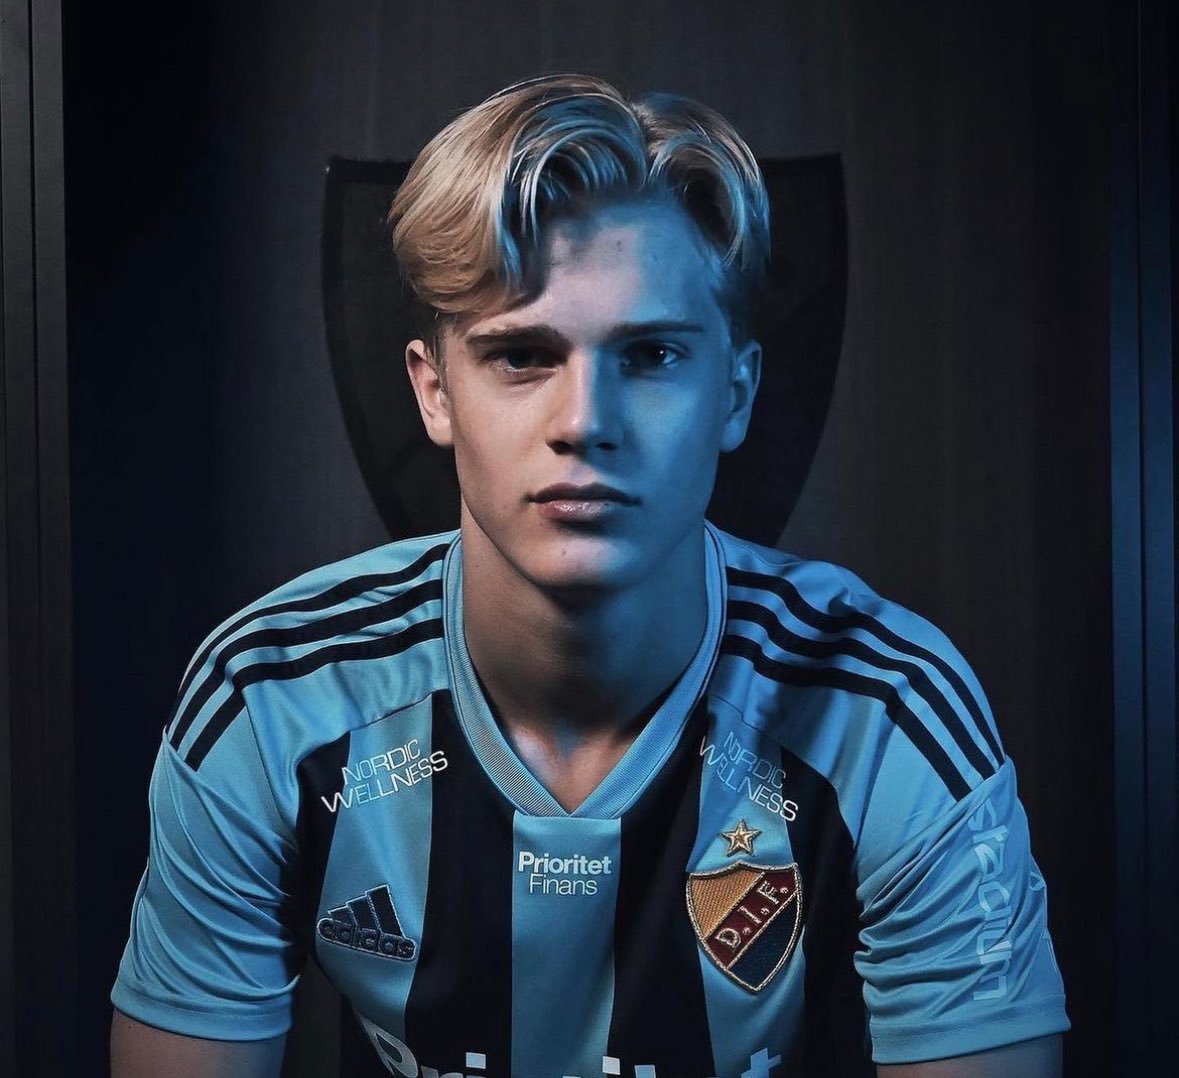 🚨⚪️ Tottenham are set to complete hijack and sign Lucas Bergvall from Djugården! Barcelona waiting for player’s final feedback but decision has been made, Spurs prepared to seal the deal. Medical can take place on Friday, as @David_Ornstein reported. Spurs, on it.